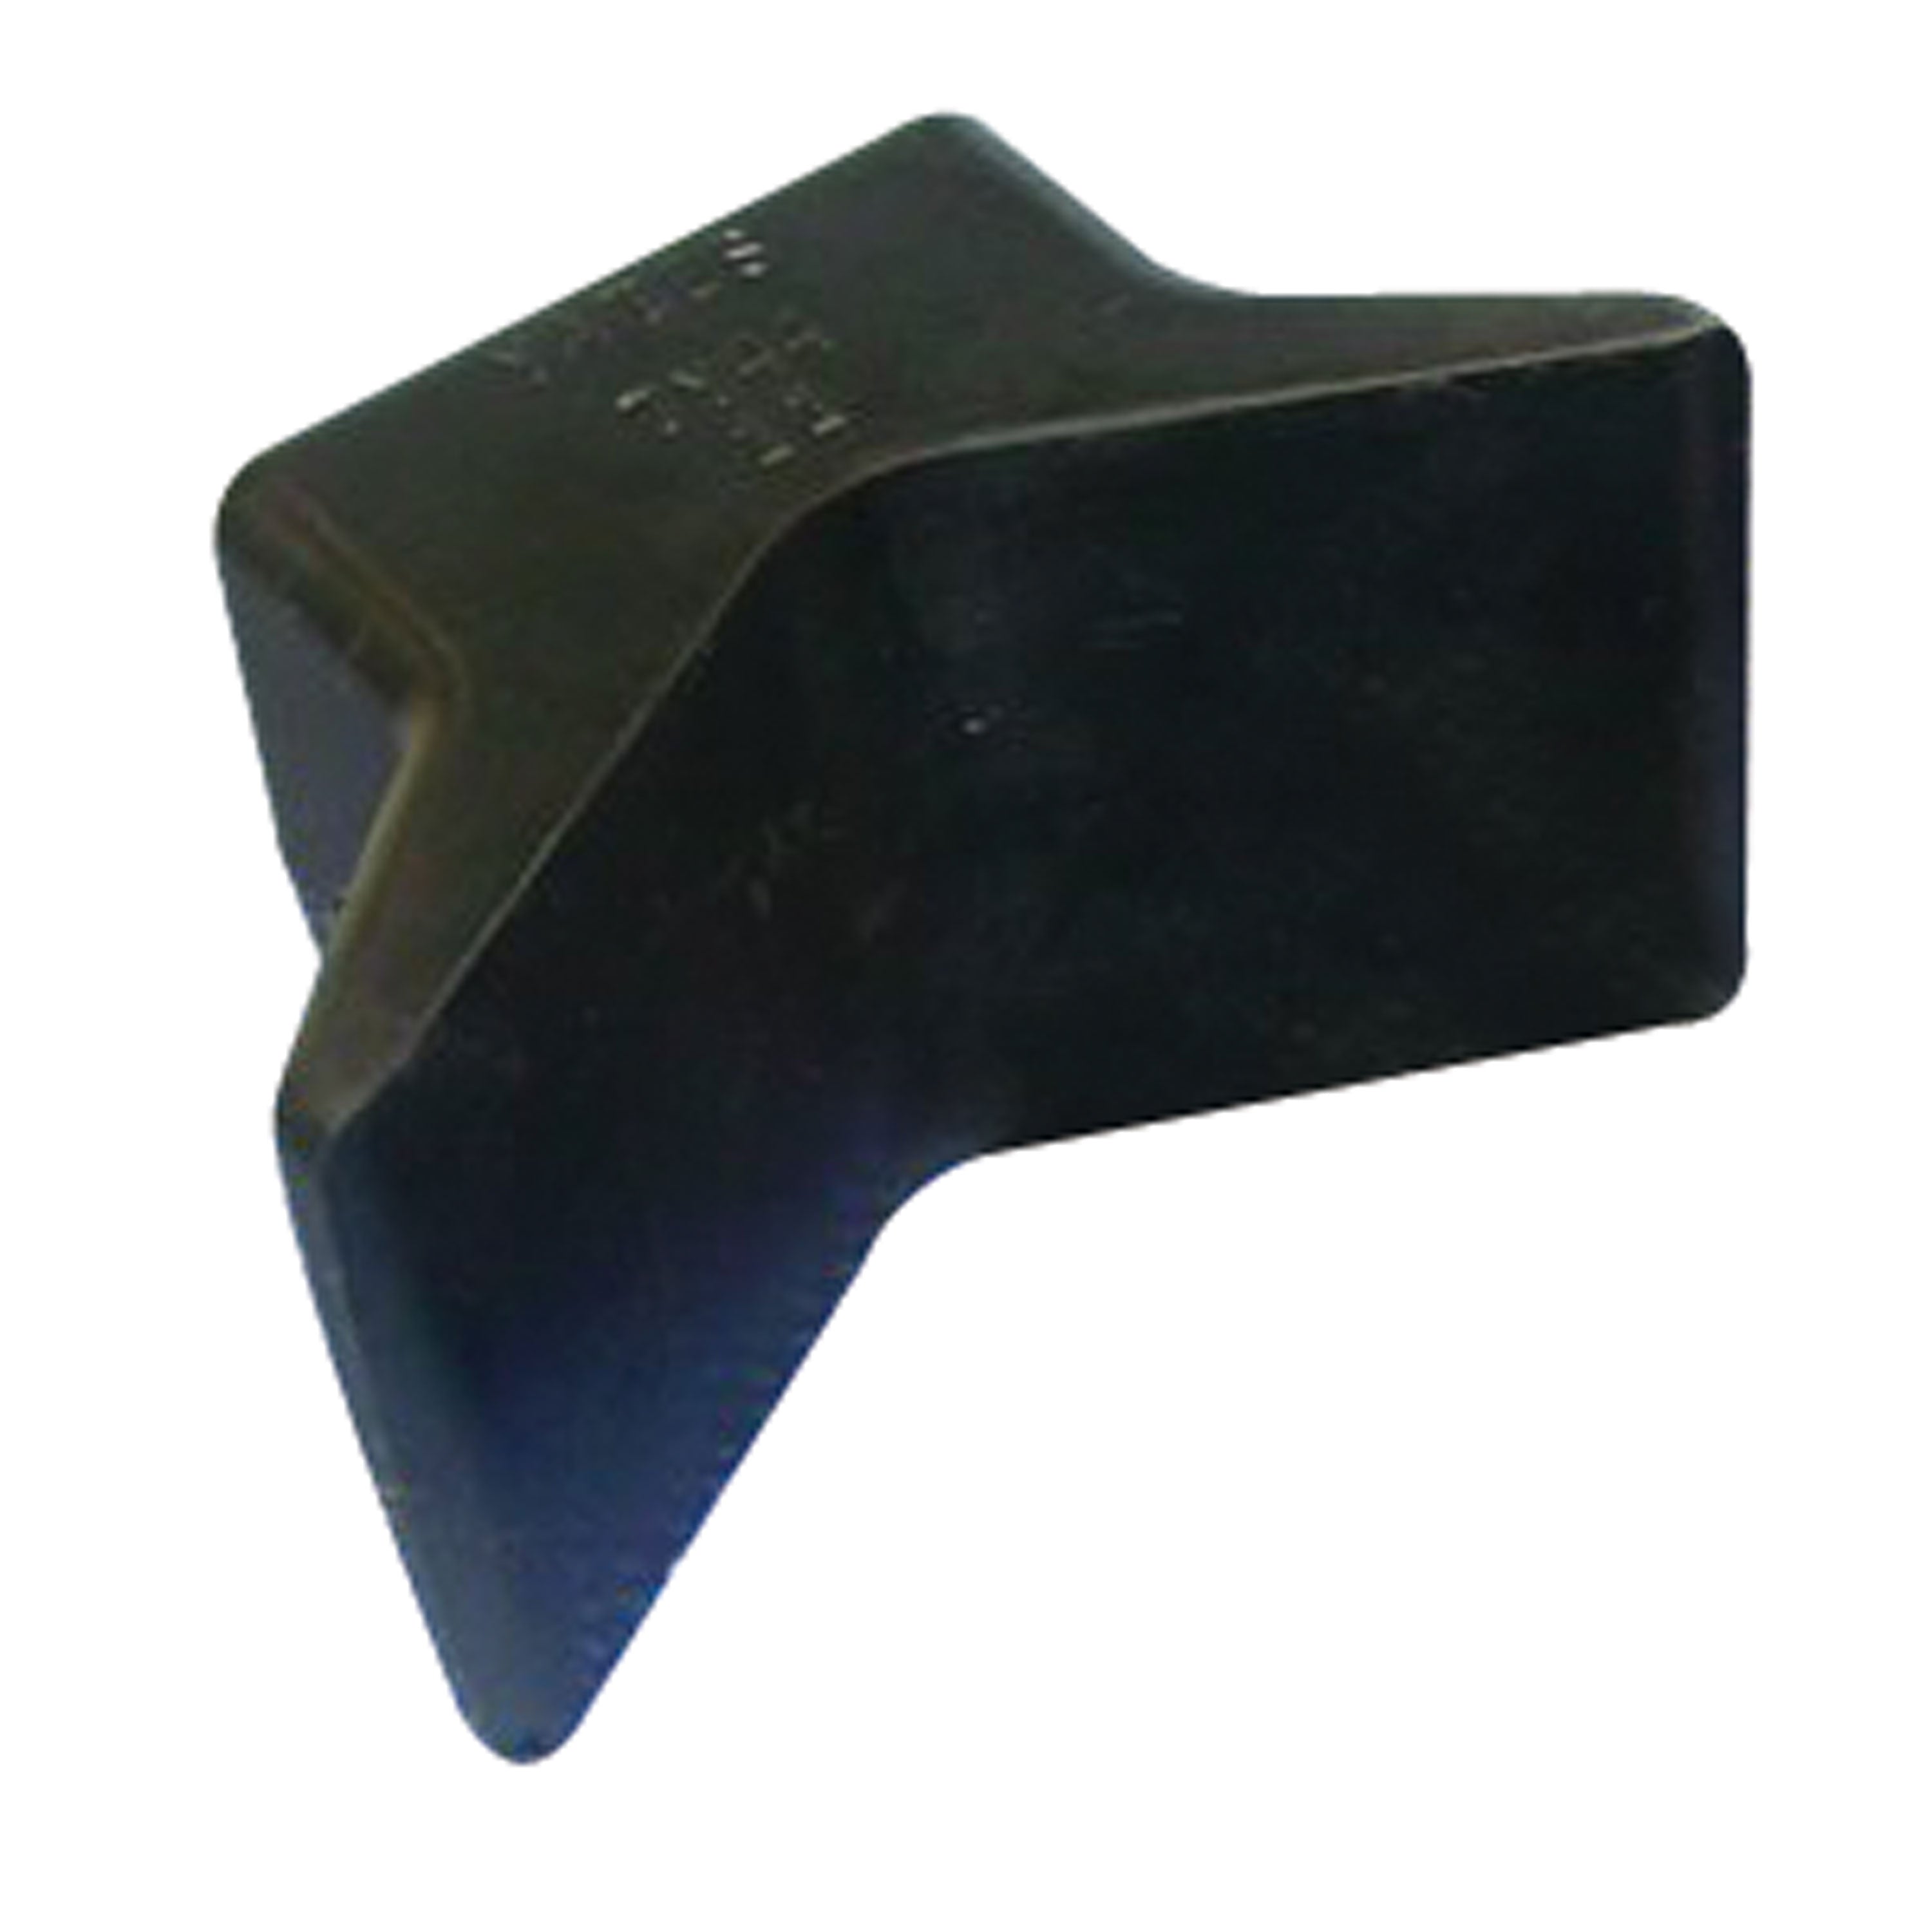 C.H. Yates 7Y44-4 Black Rubber Molded 'Y' Bow Stop - 4 in. x 4 in. x 0.5 in.